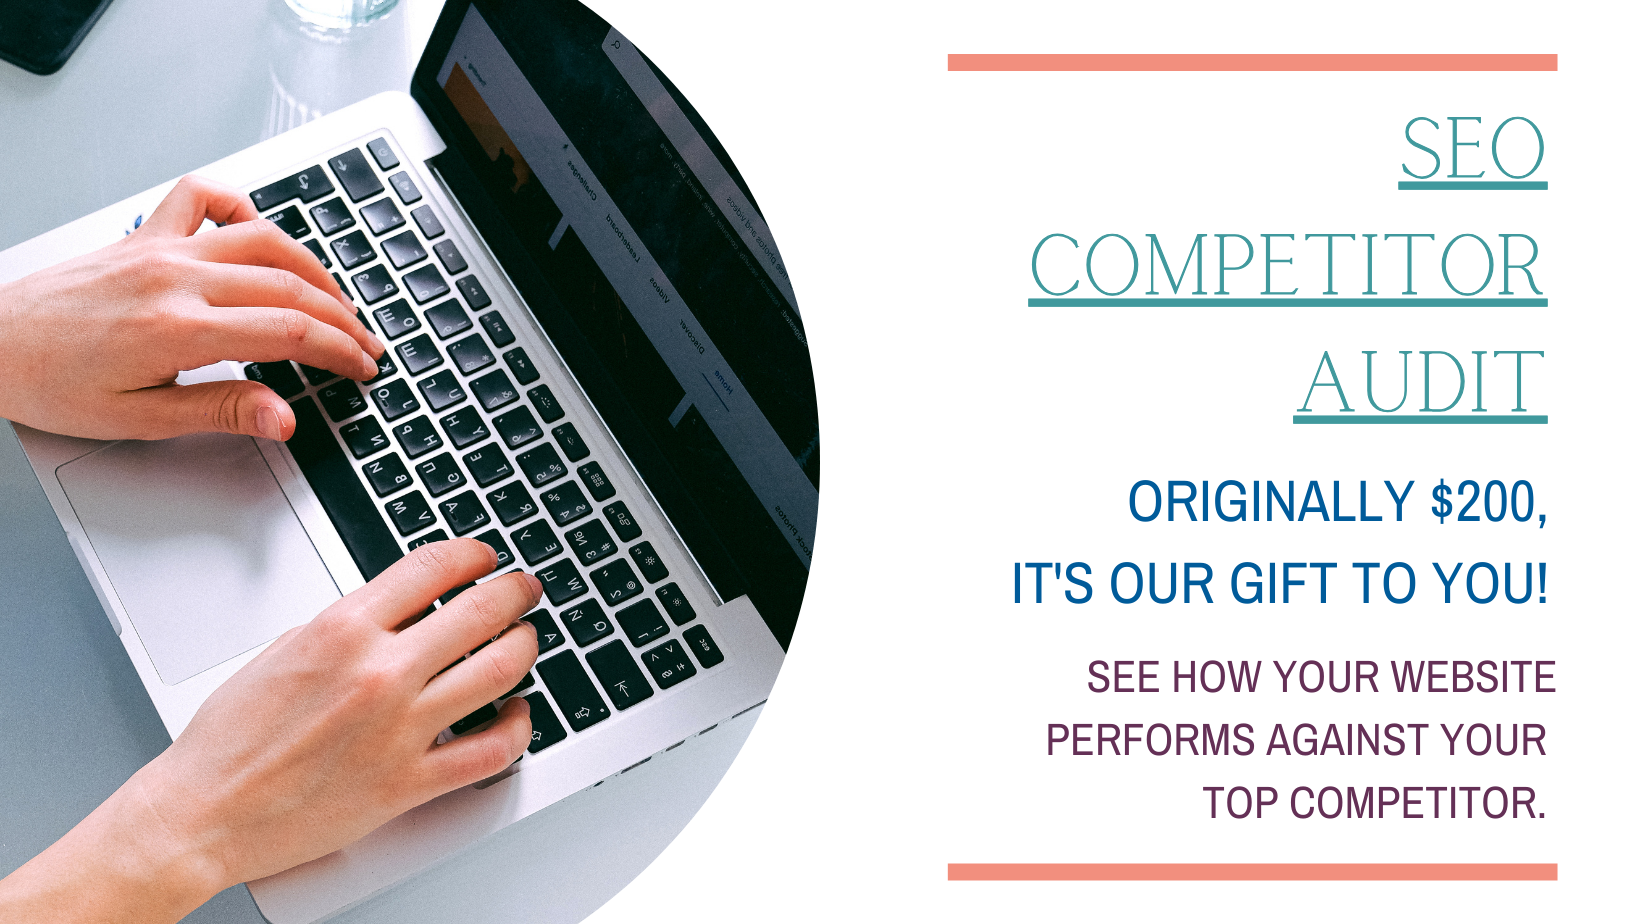 SEO Competitor Audit- See how your website performs against your top competitor. Originally $200, it's our gift to you!